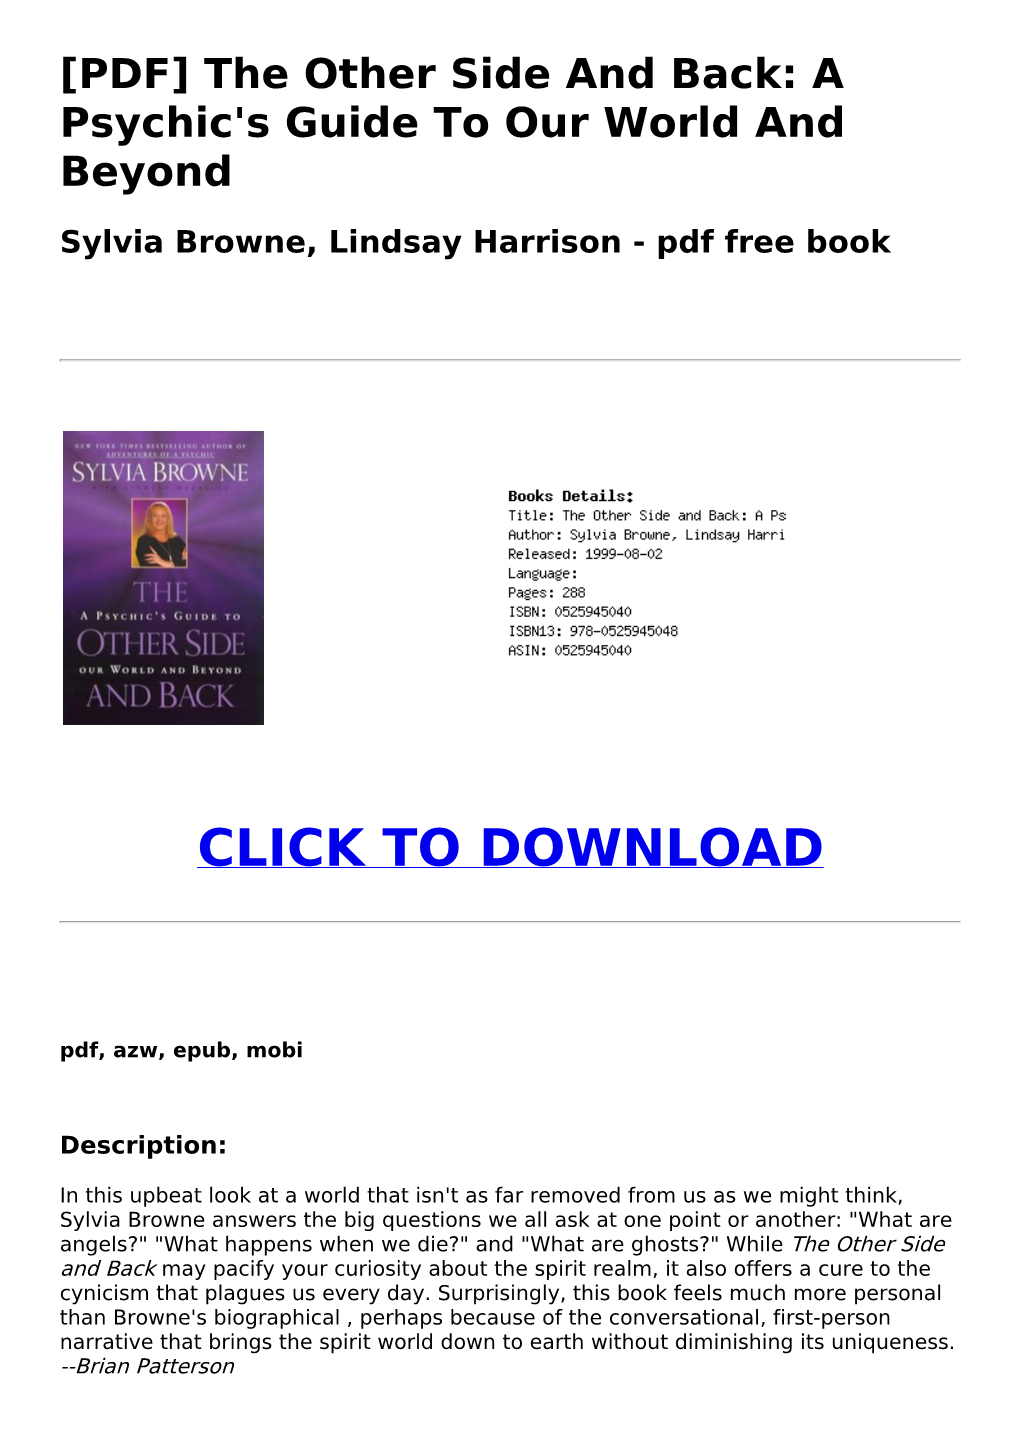 [803632C] [PDF] the Other Side and Back: a Psychic's Guide to Our World and Beyond Sylvia Browne, Lindsay Harrison